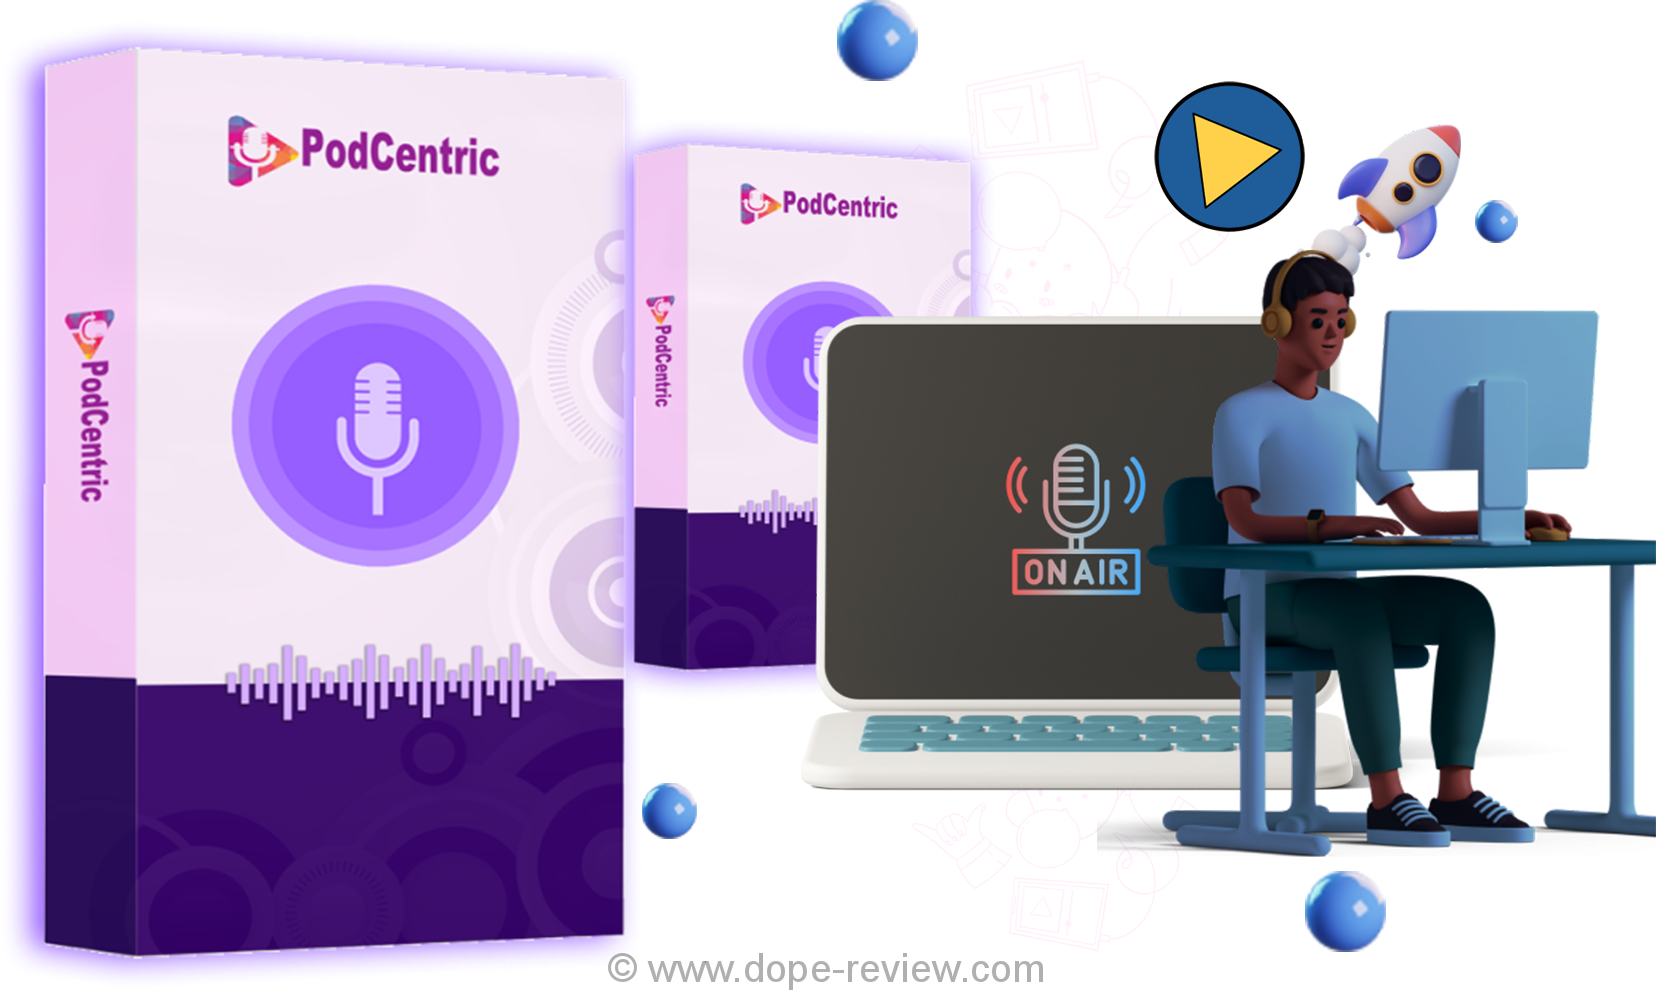 Podcentric